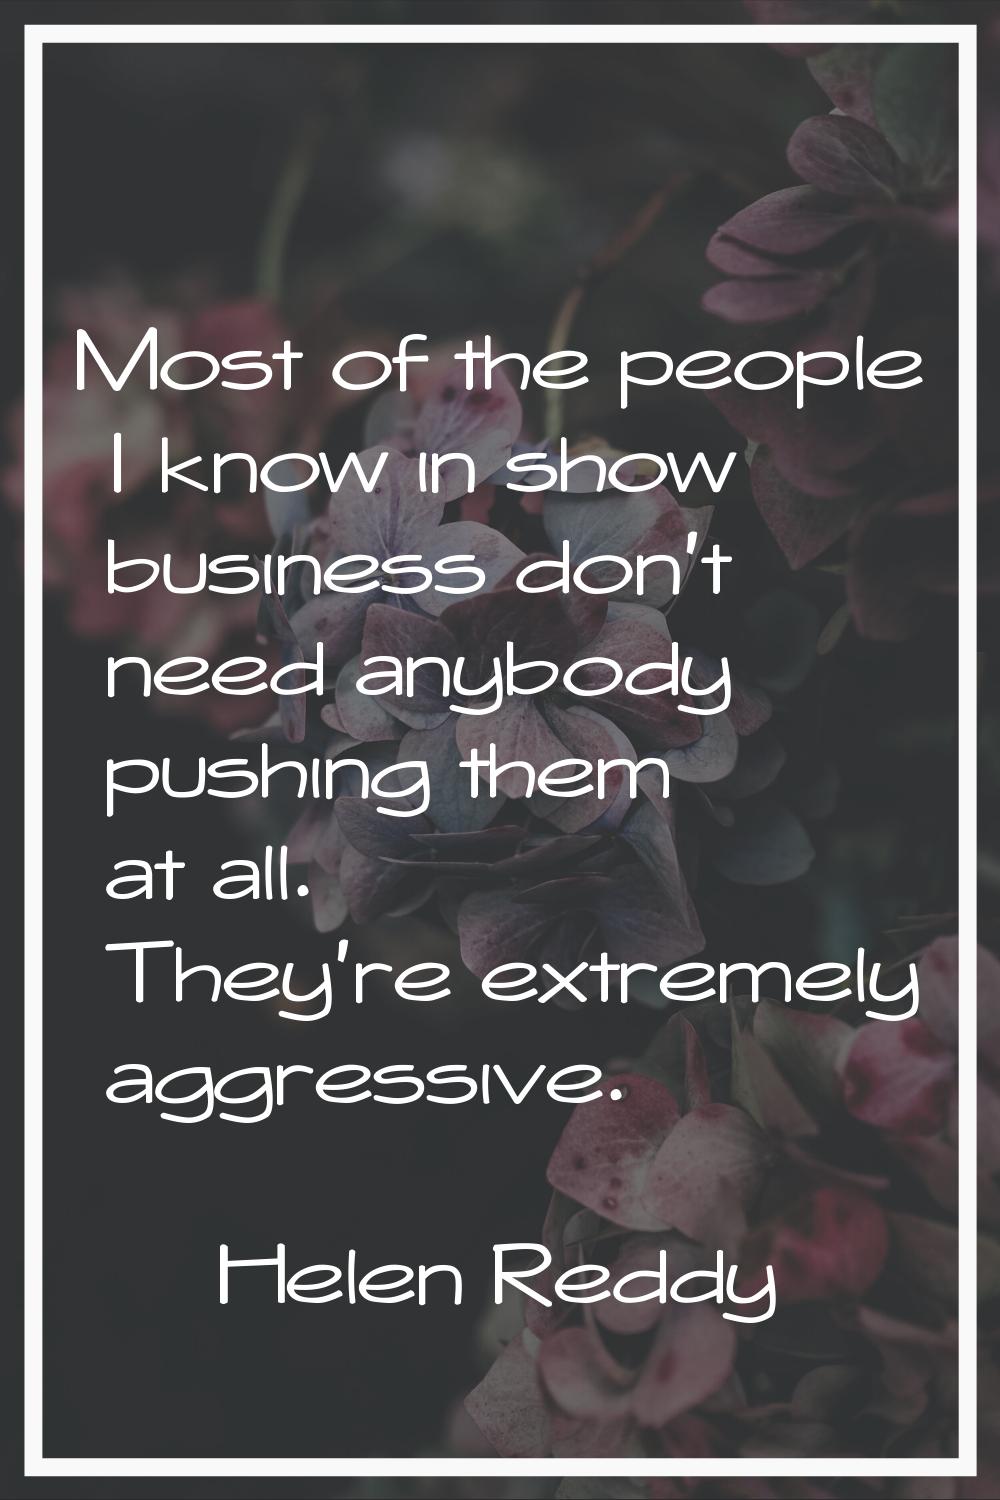 Most of the people I know in show business don't need anybody pushing them at all. They're extremel